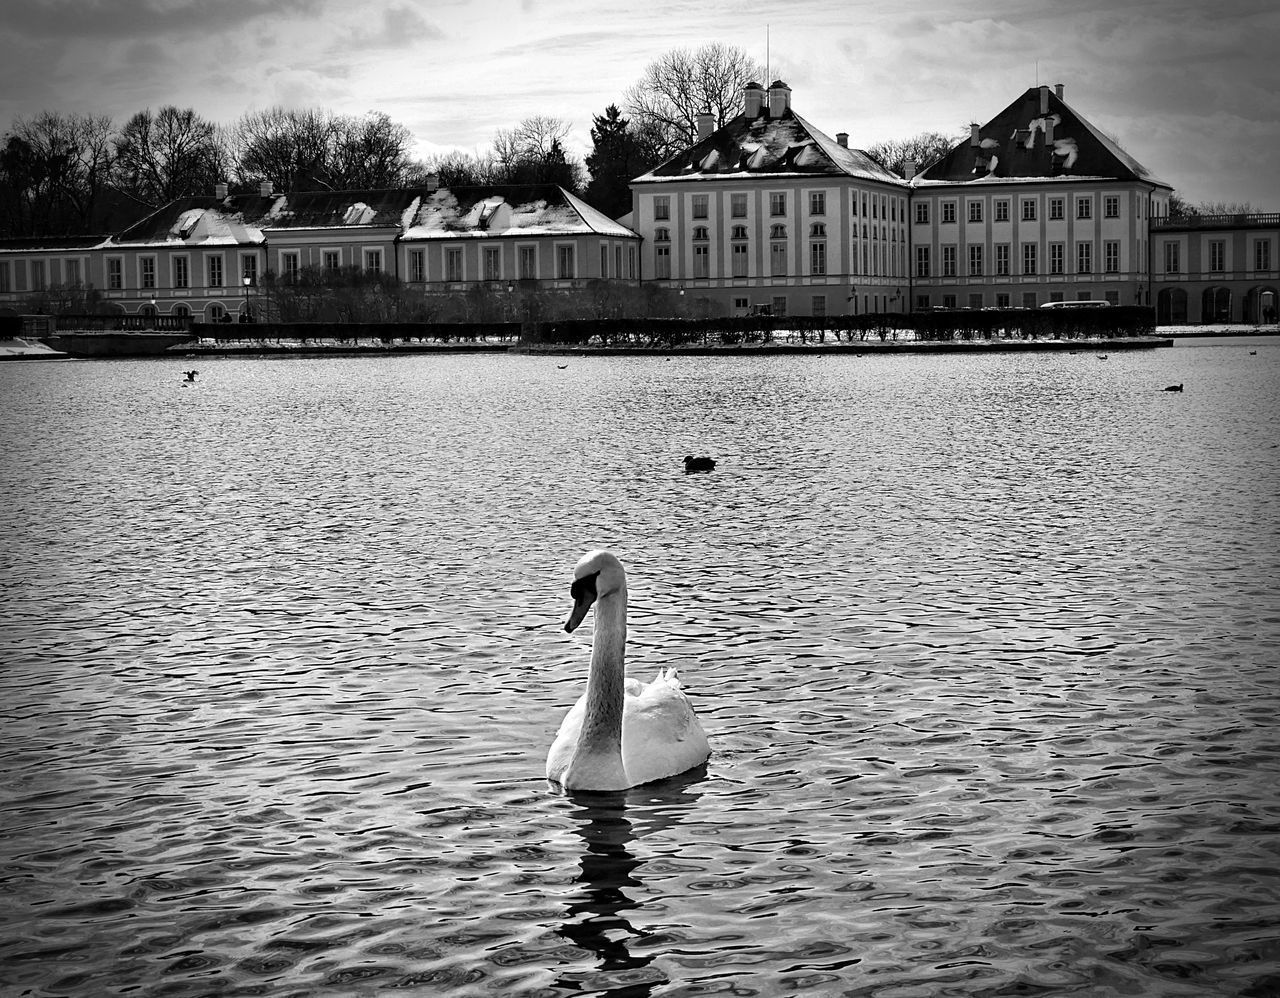 SWAN SWIMMING IN LAKE AGAINST BUILT STRUCTURES